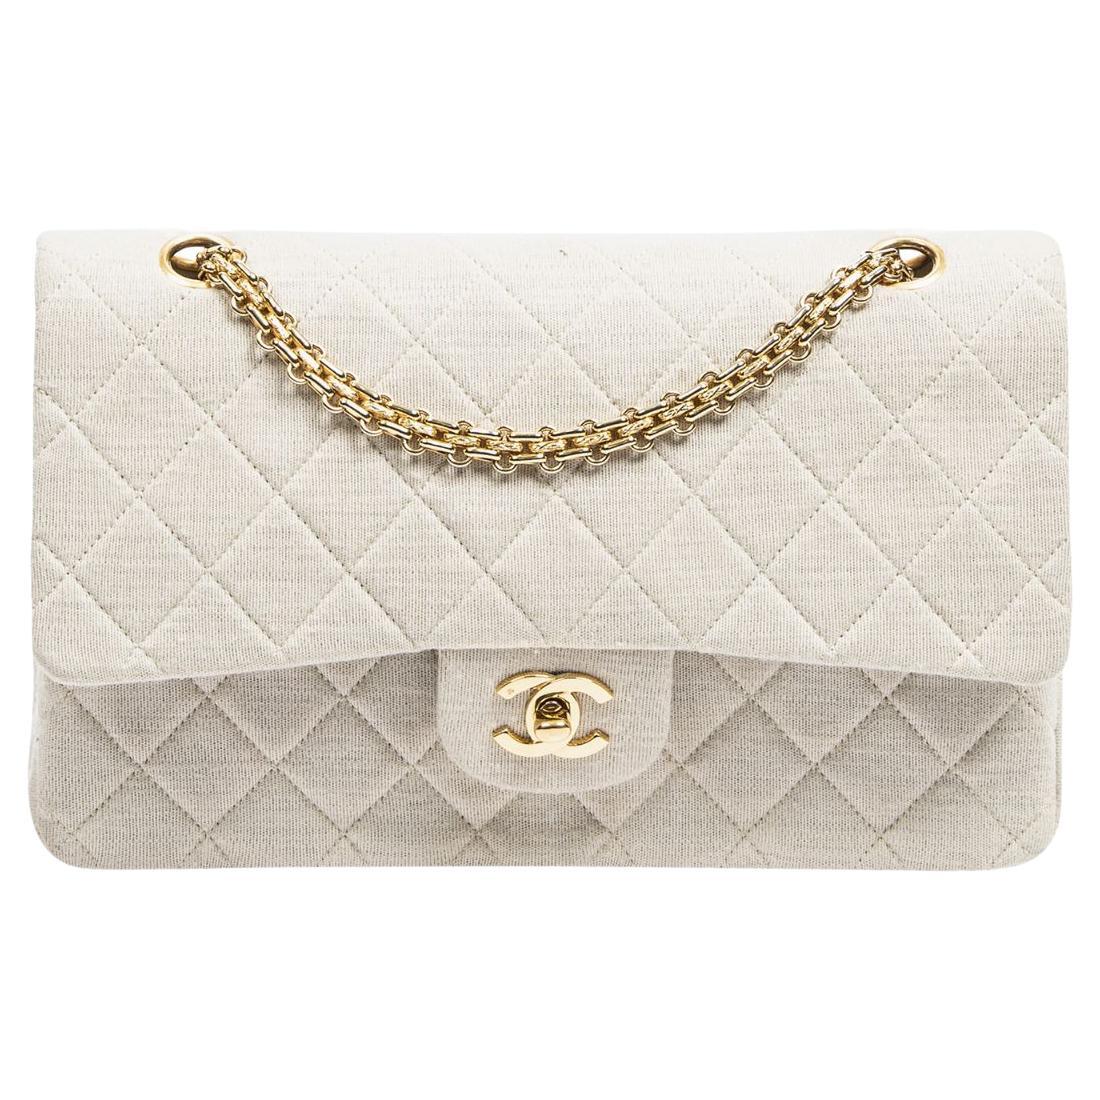 Chanel 90s Ivory Medium Double Flap Bag For Sale